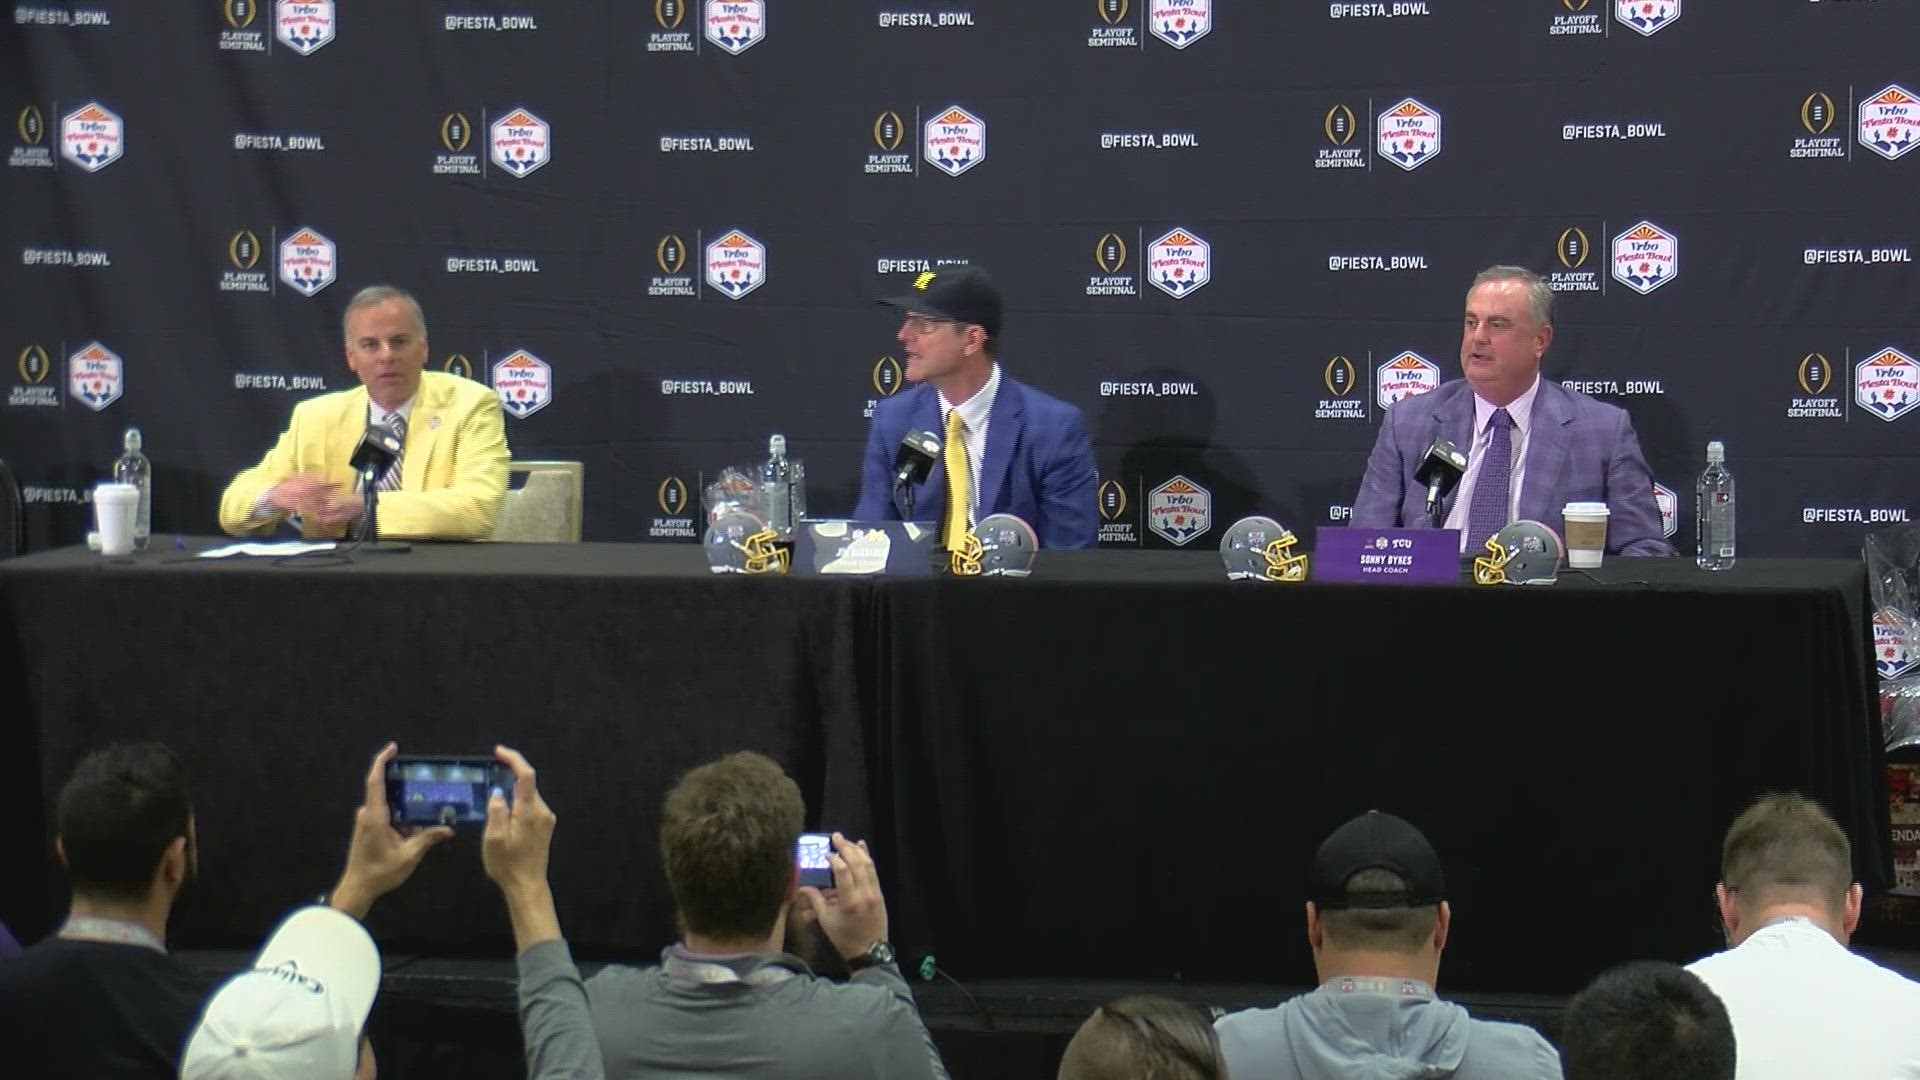 Michigan and TCU held a joint news conference in Arizona Friday ahead of Saturday's Fiesta Bowl.